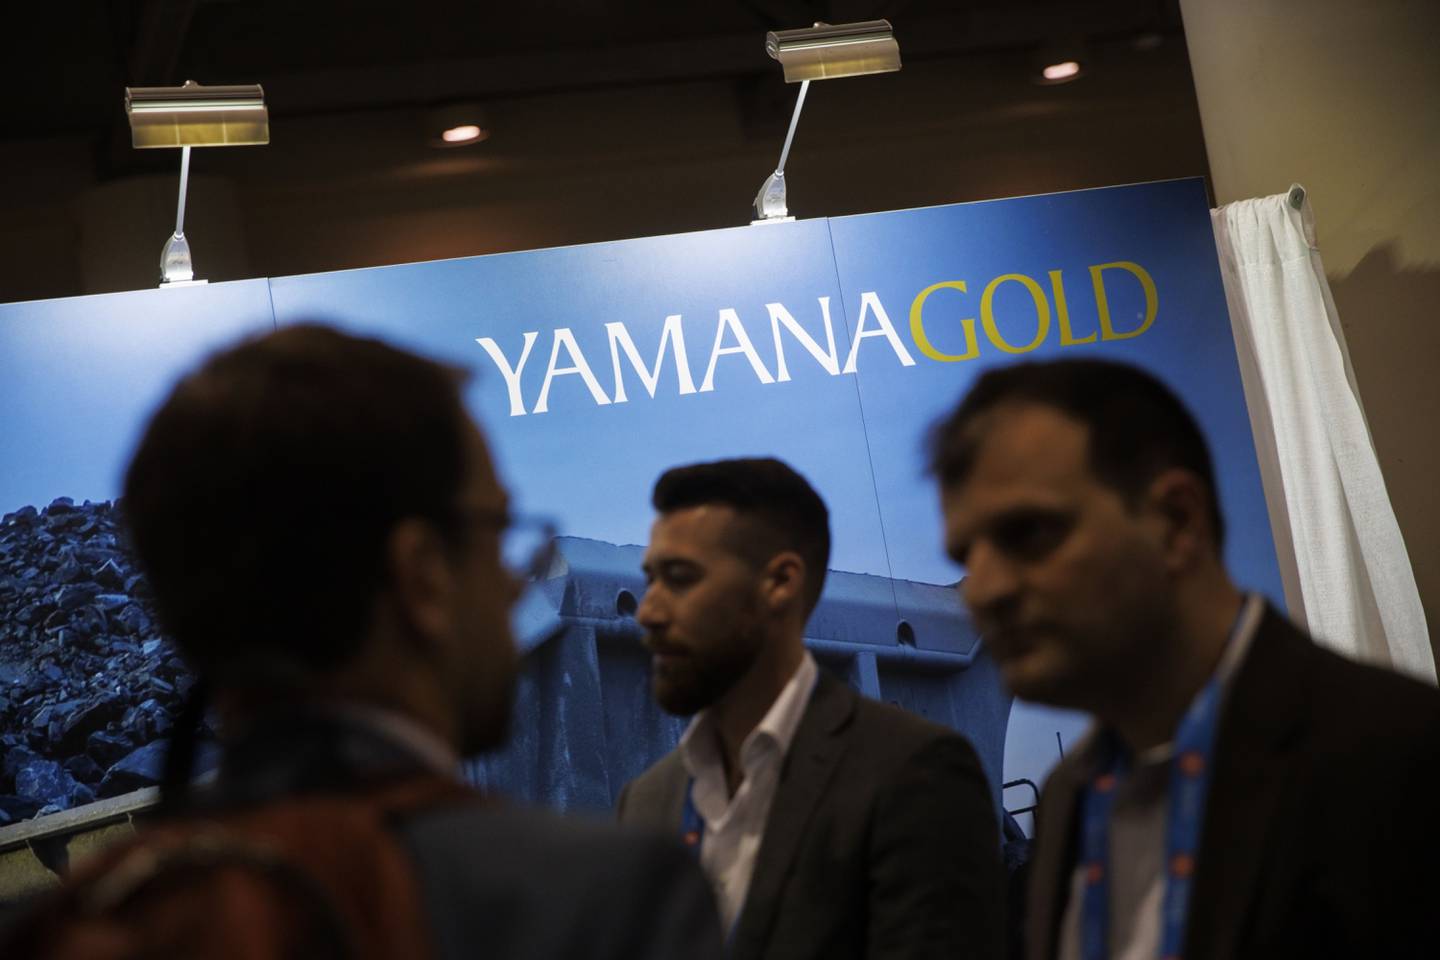 Shareholders of both Yamana and Pan American Silver Corp. voted in favor of the cash-and-stock deal at separate meetings in Toronto and Vancouver